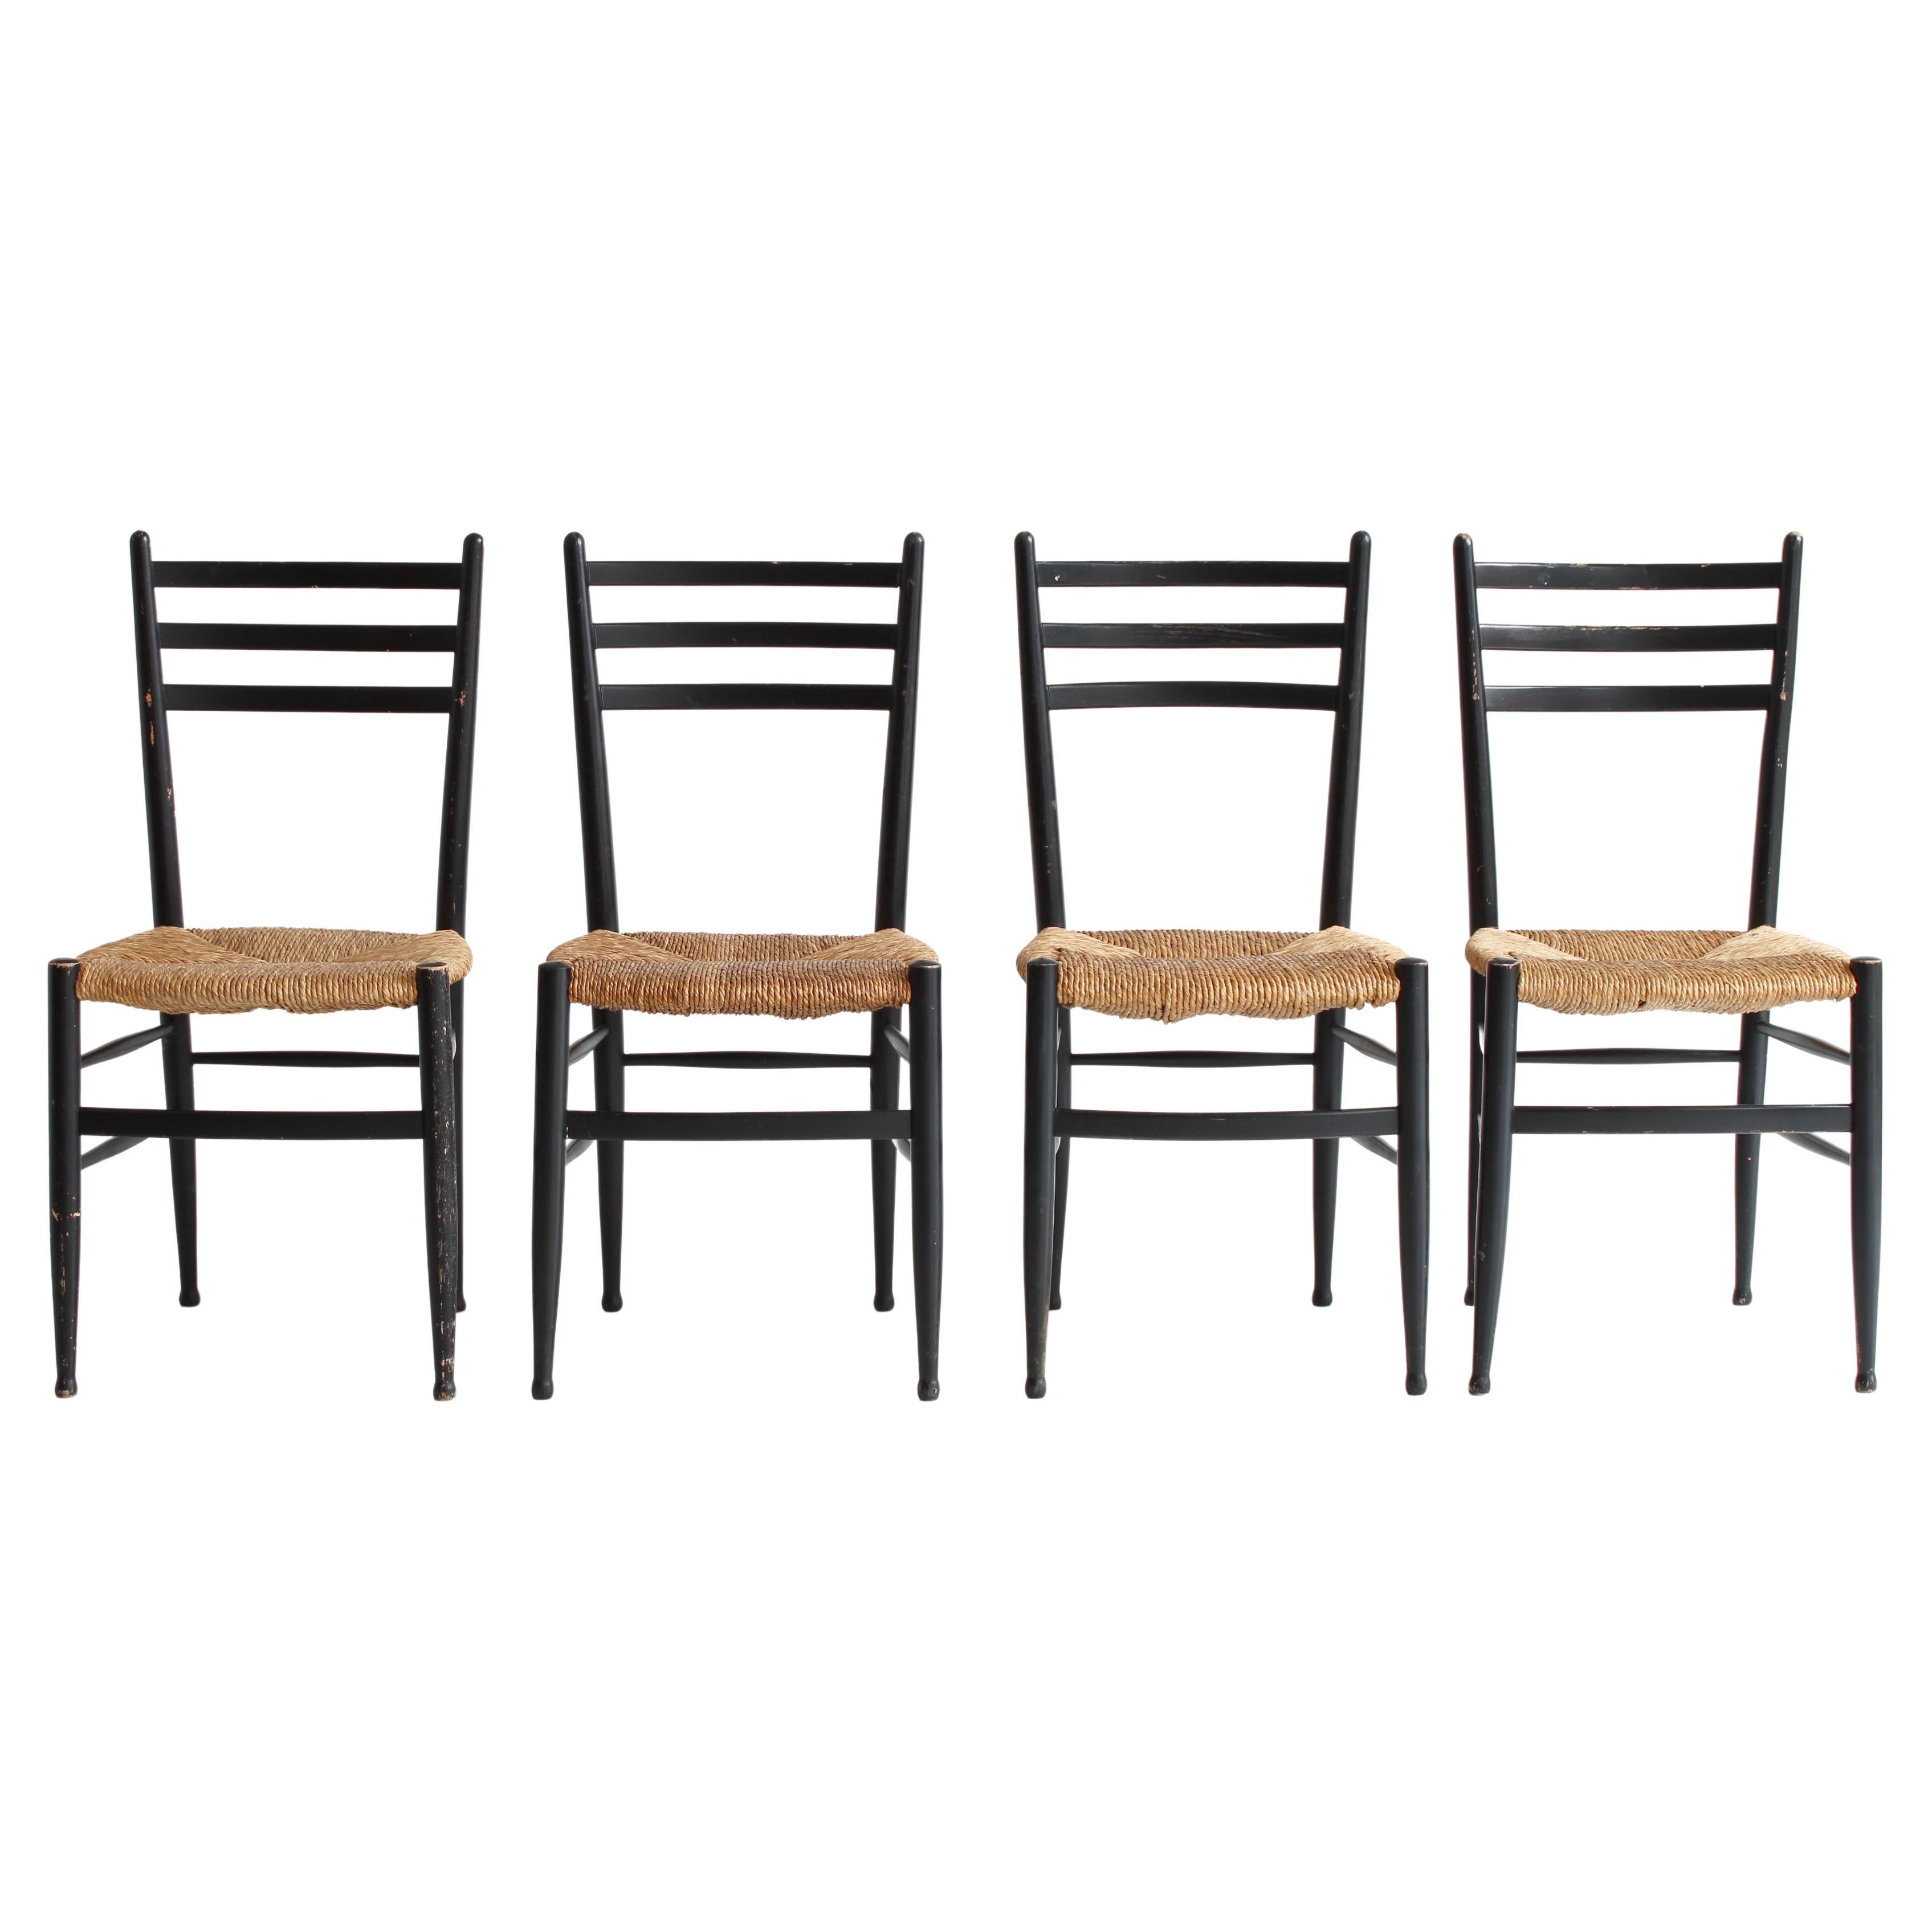 Set of 4 Black Dining Chairs Woven Seagrass Chairs by Gessef, Italy, 1960s